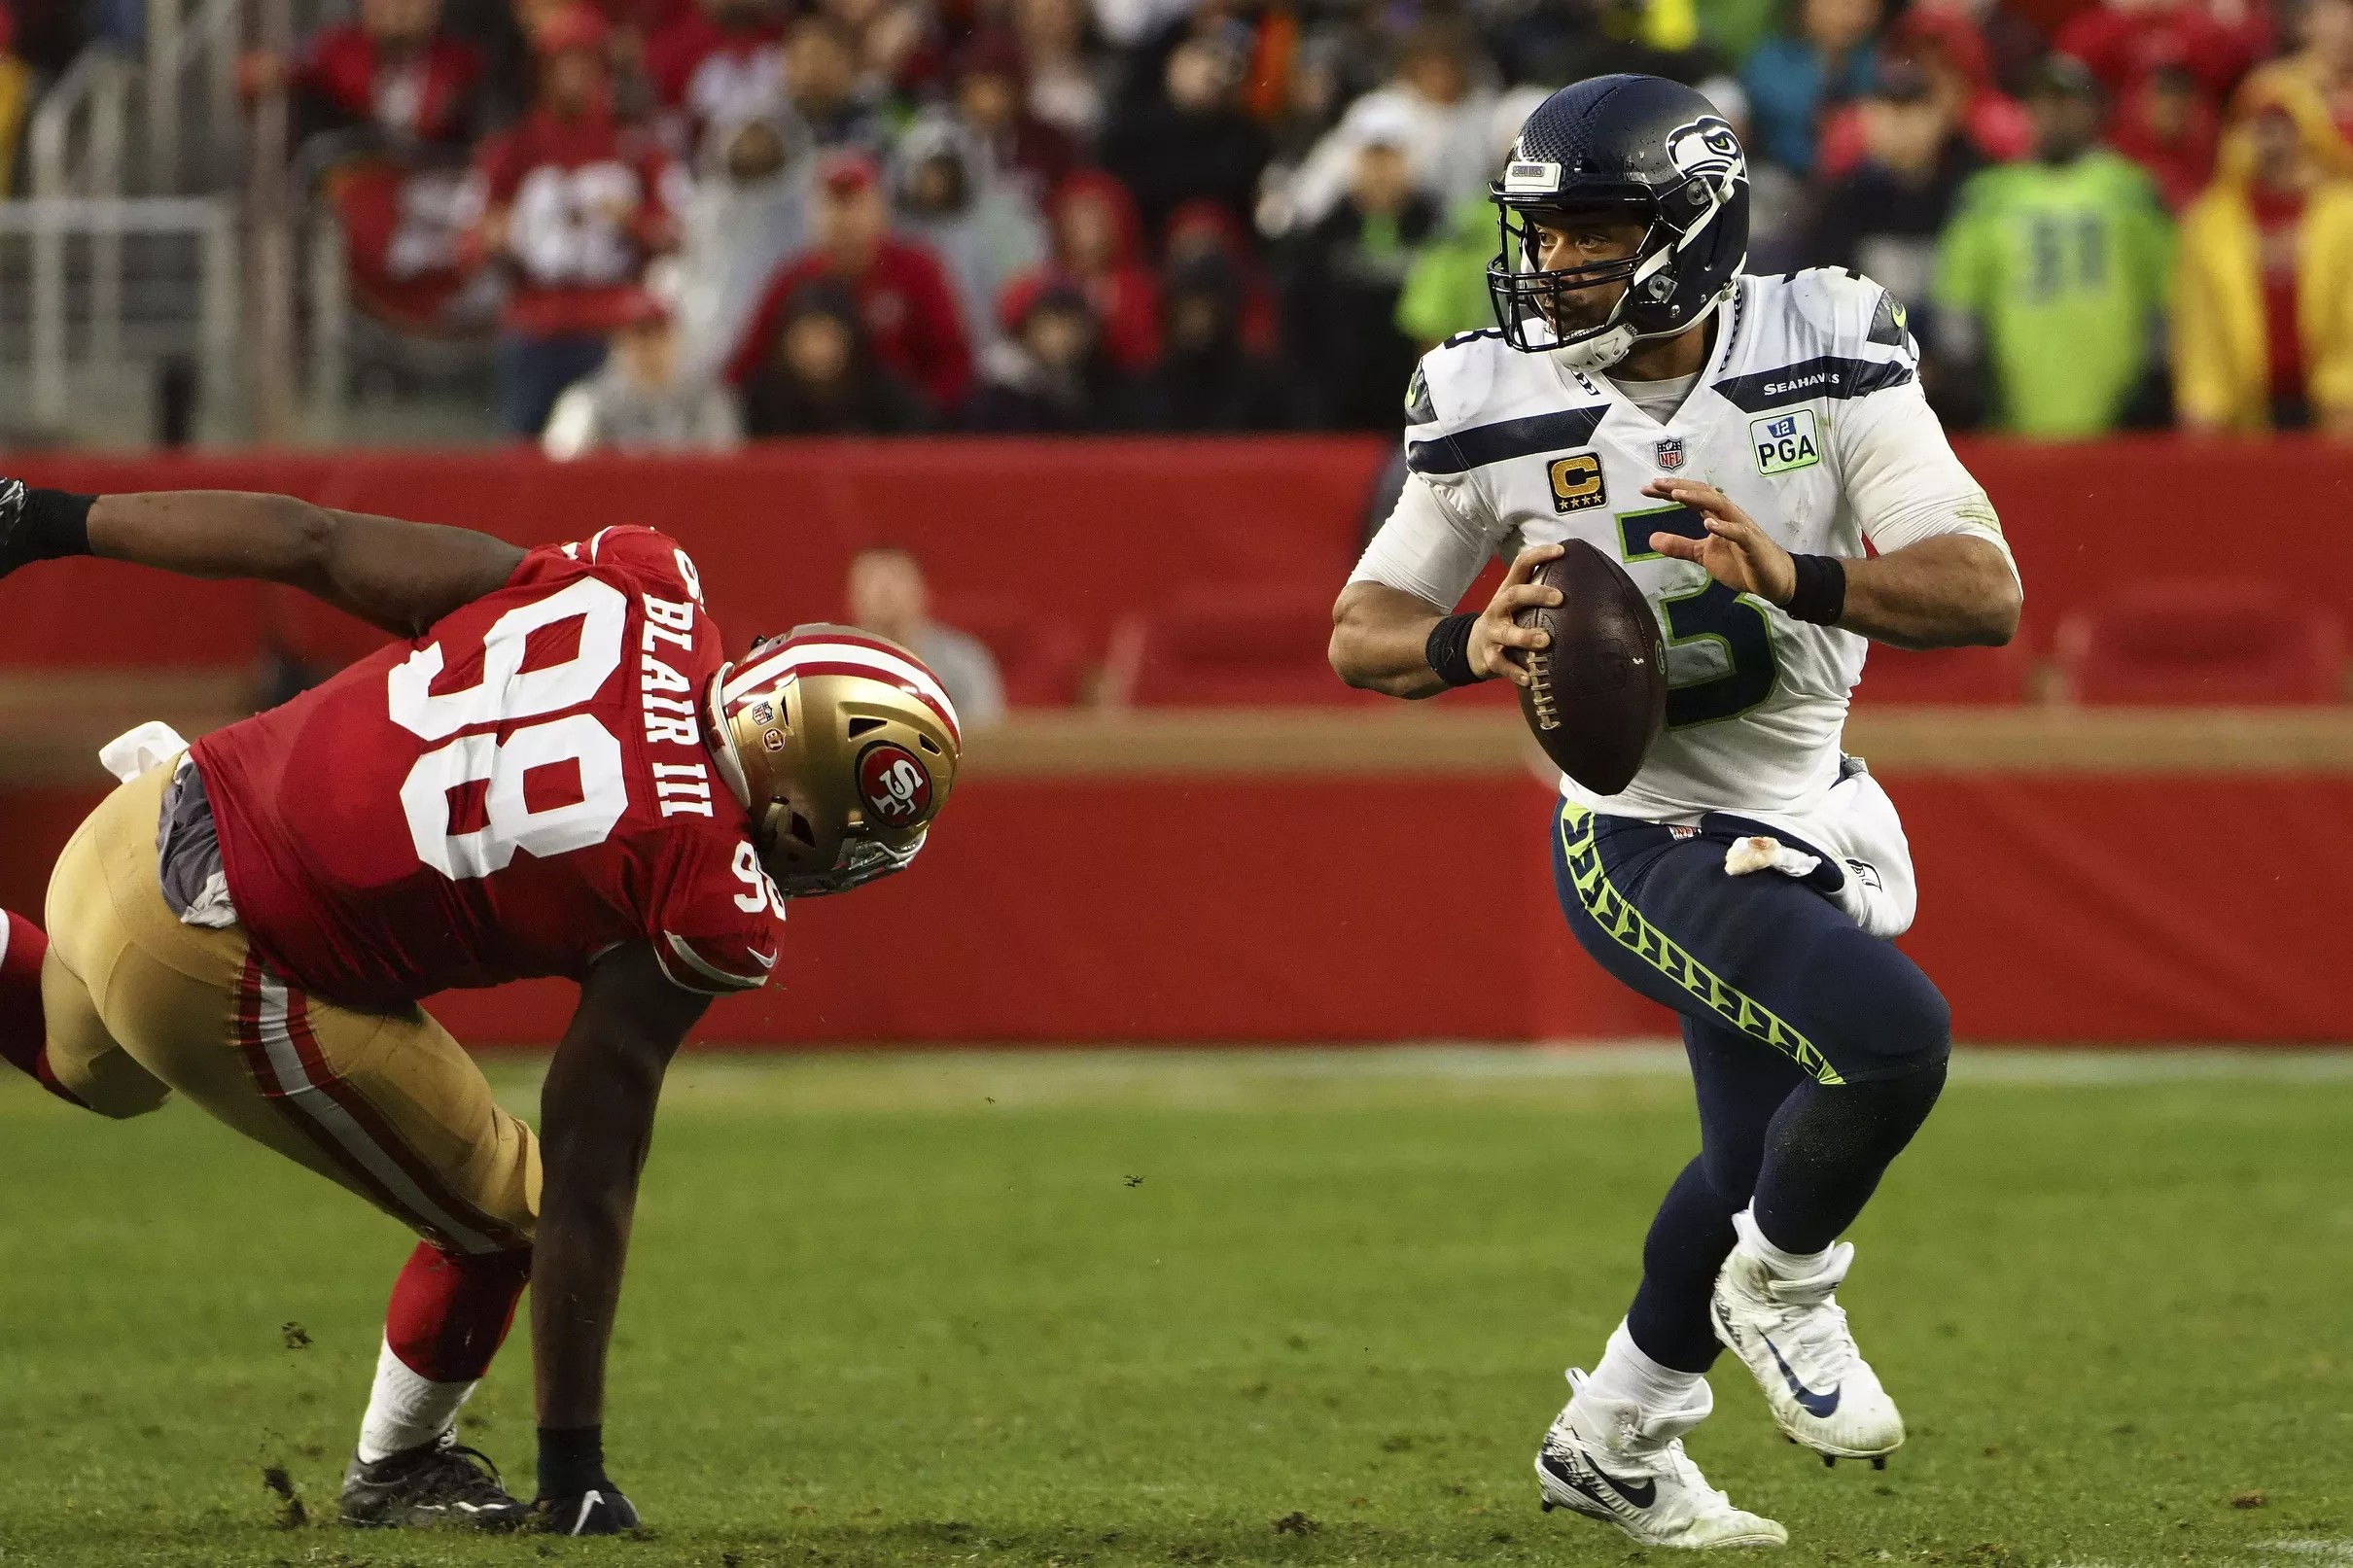 Seahawks vs. 49ers Kickoff time, TV coverage, radio, live streaming